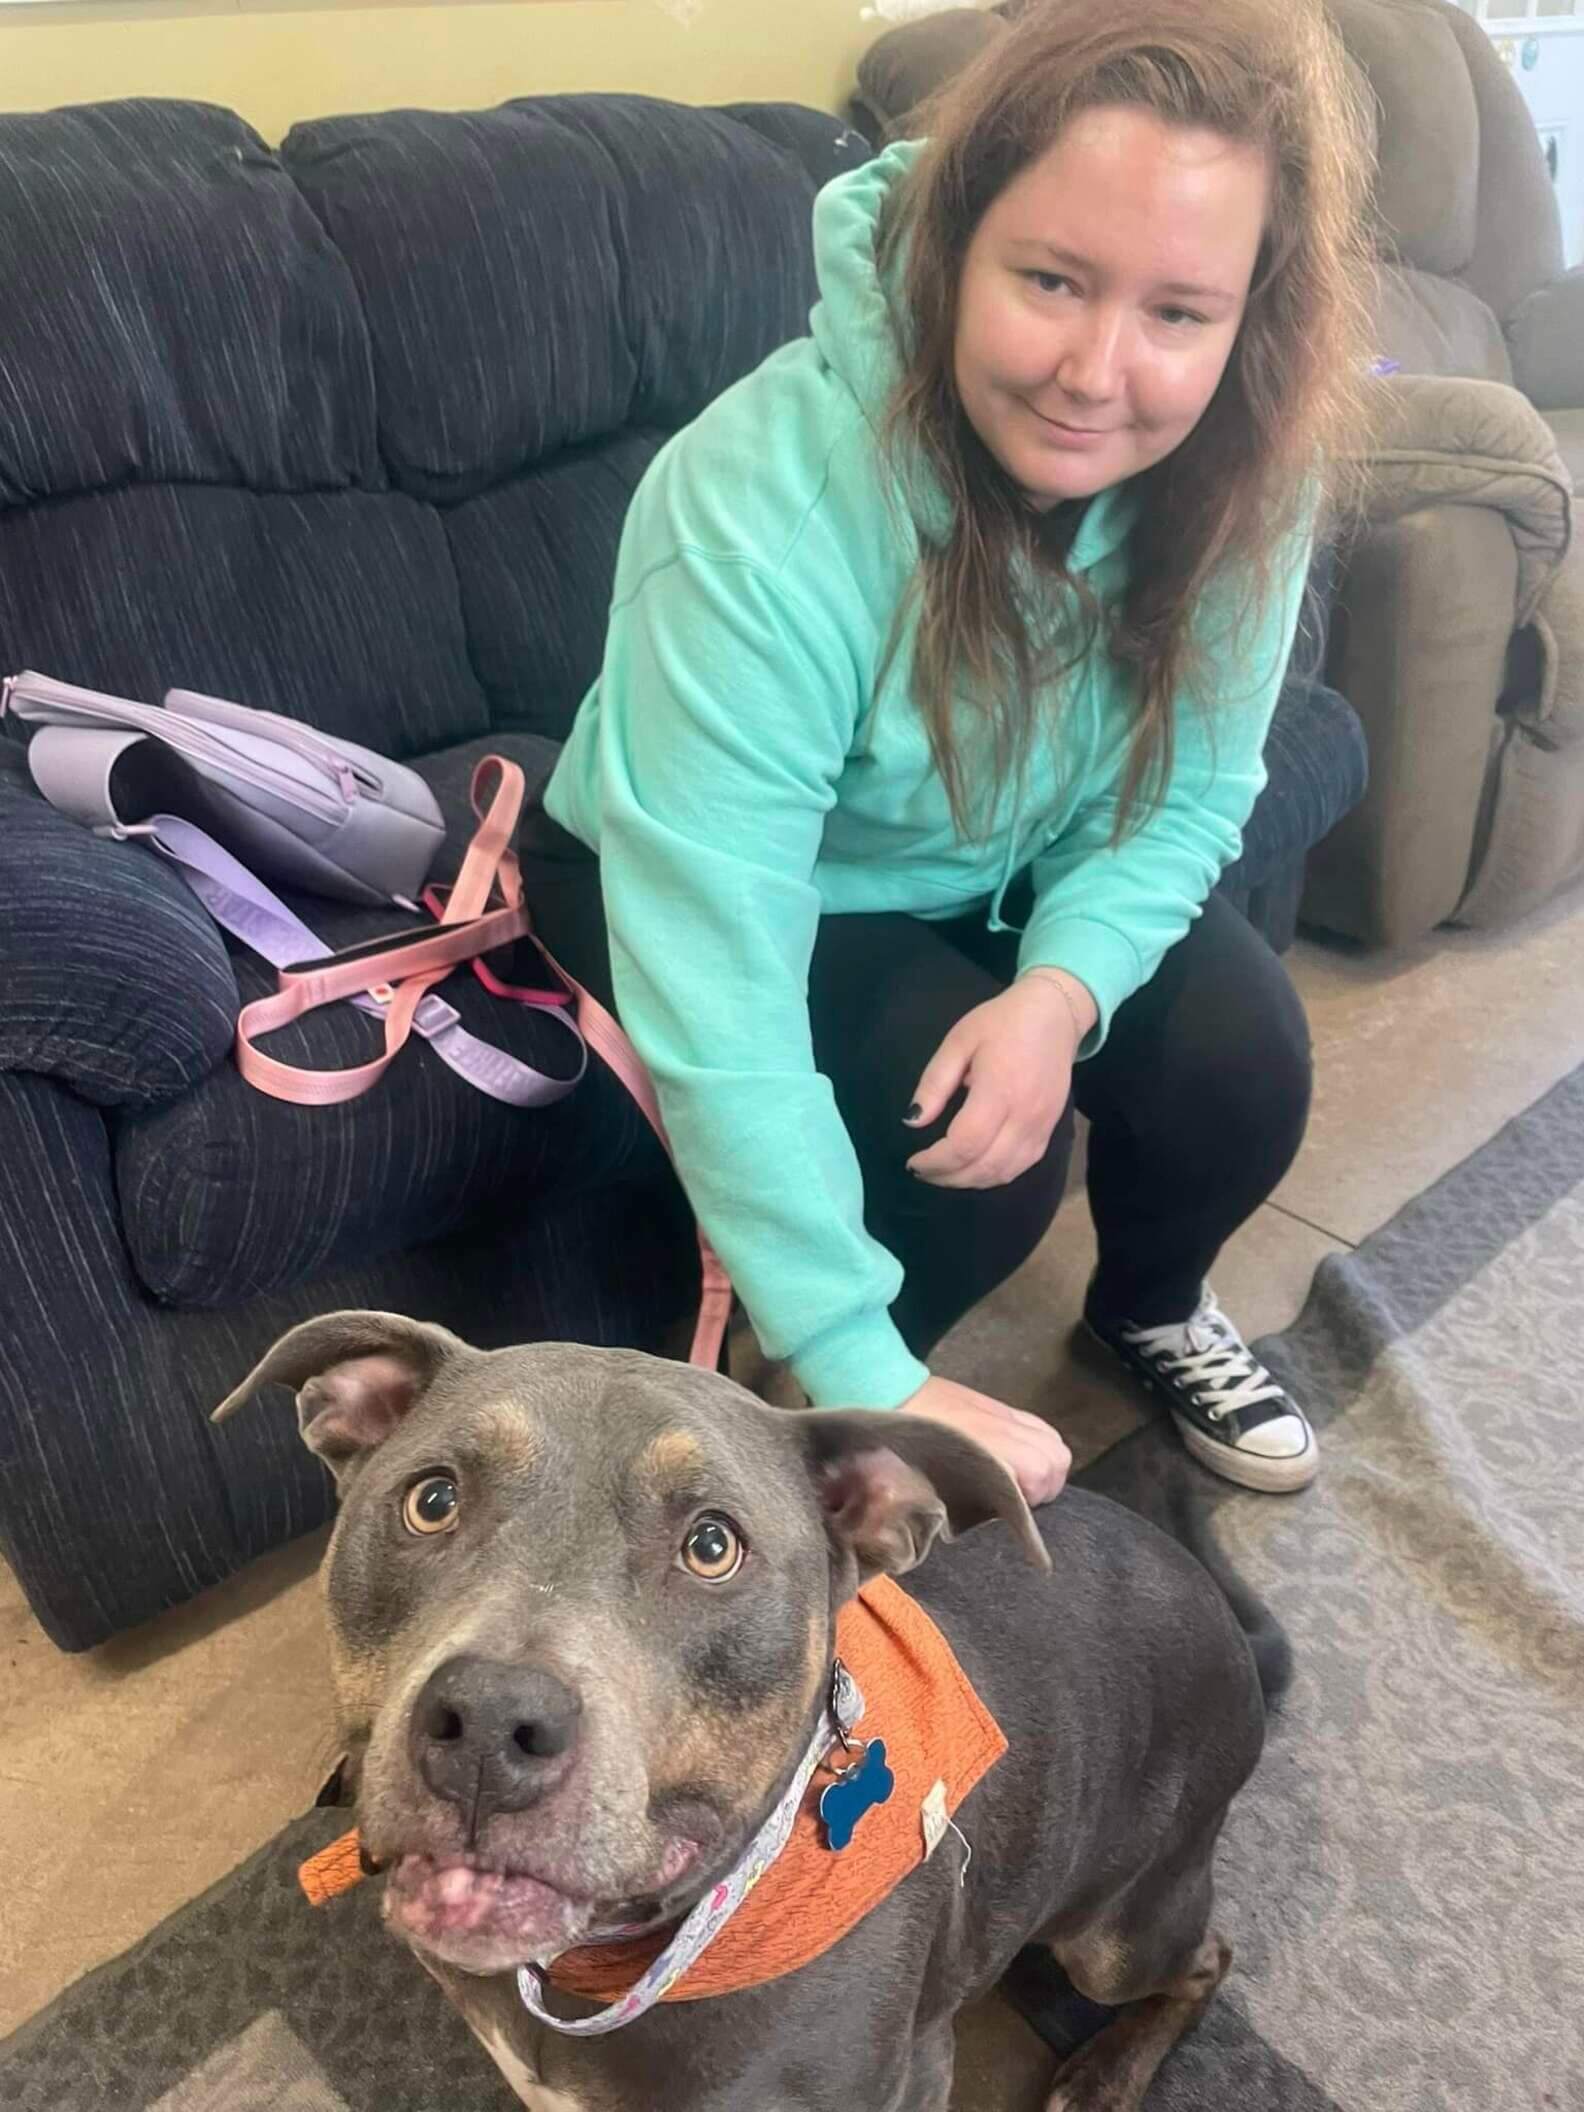 Woman Weeps at Sight of Shelter Pit Bull Wearing Bandana Belonging to Her Deceased Dog